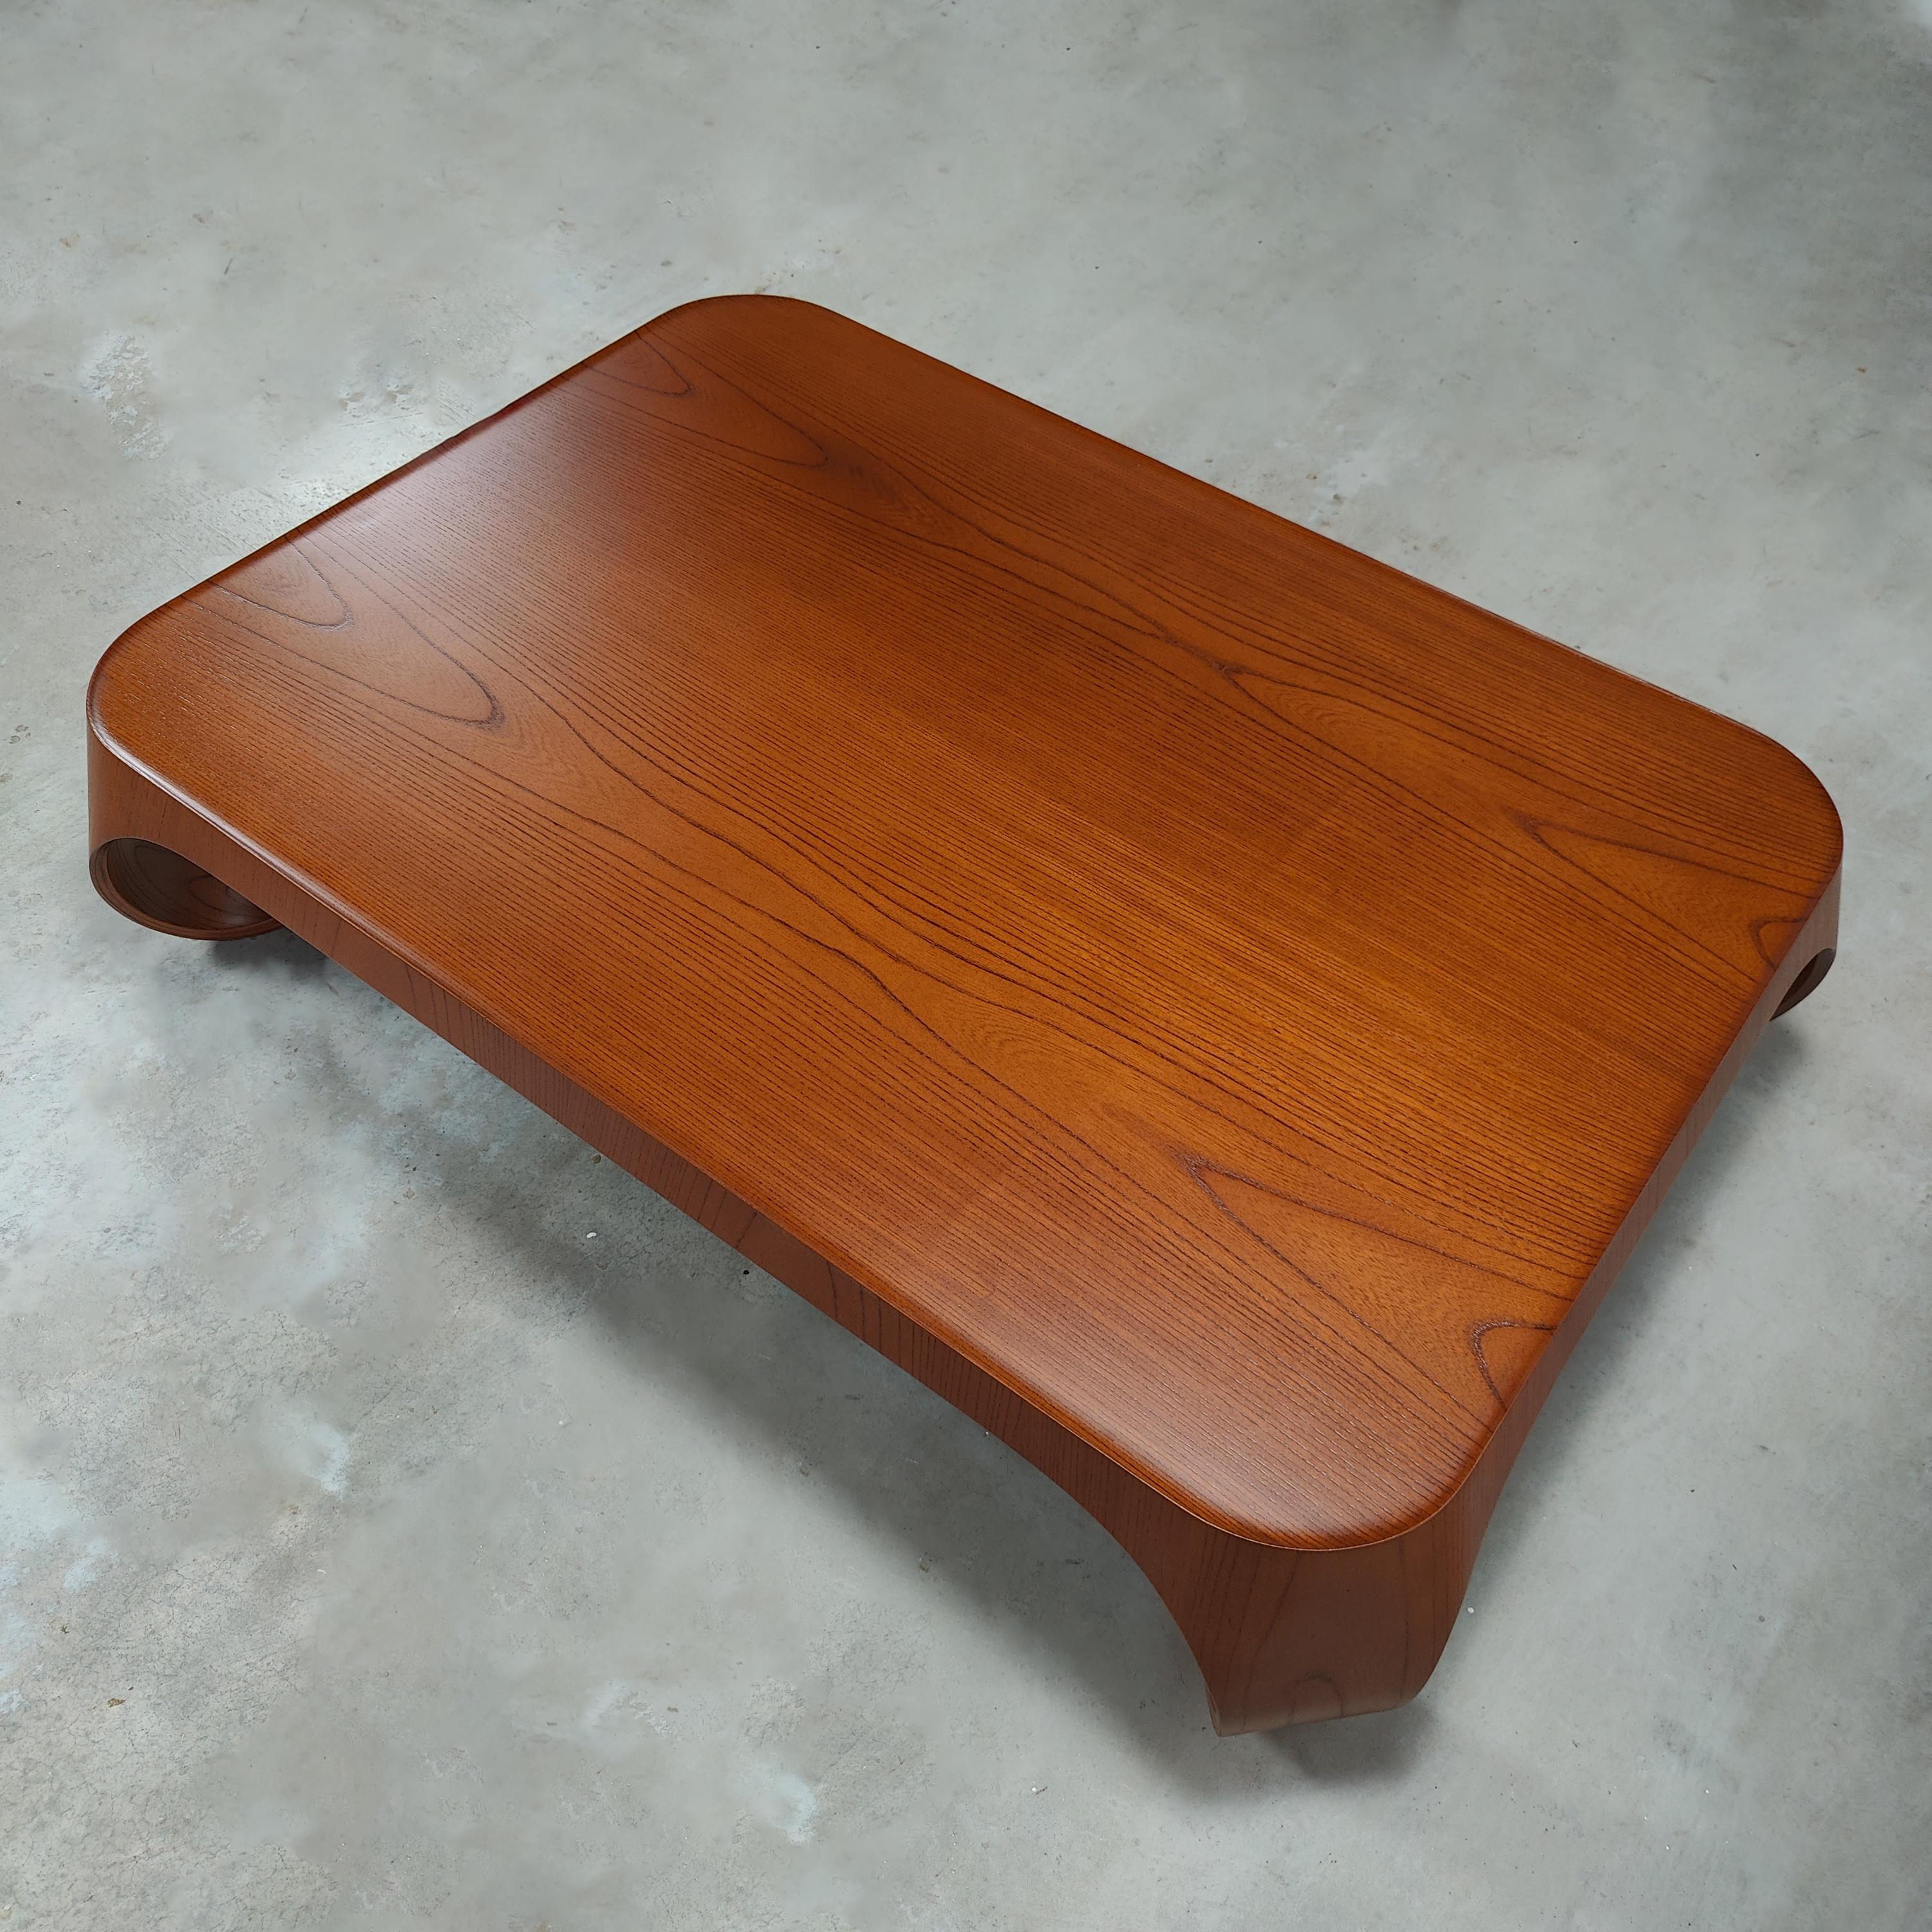 Japanese Modern Coffee Table By Isamu Kenmochi for Tendo Mokko In Excellent Condition For Sale In Chino Hills, CA